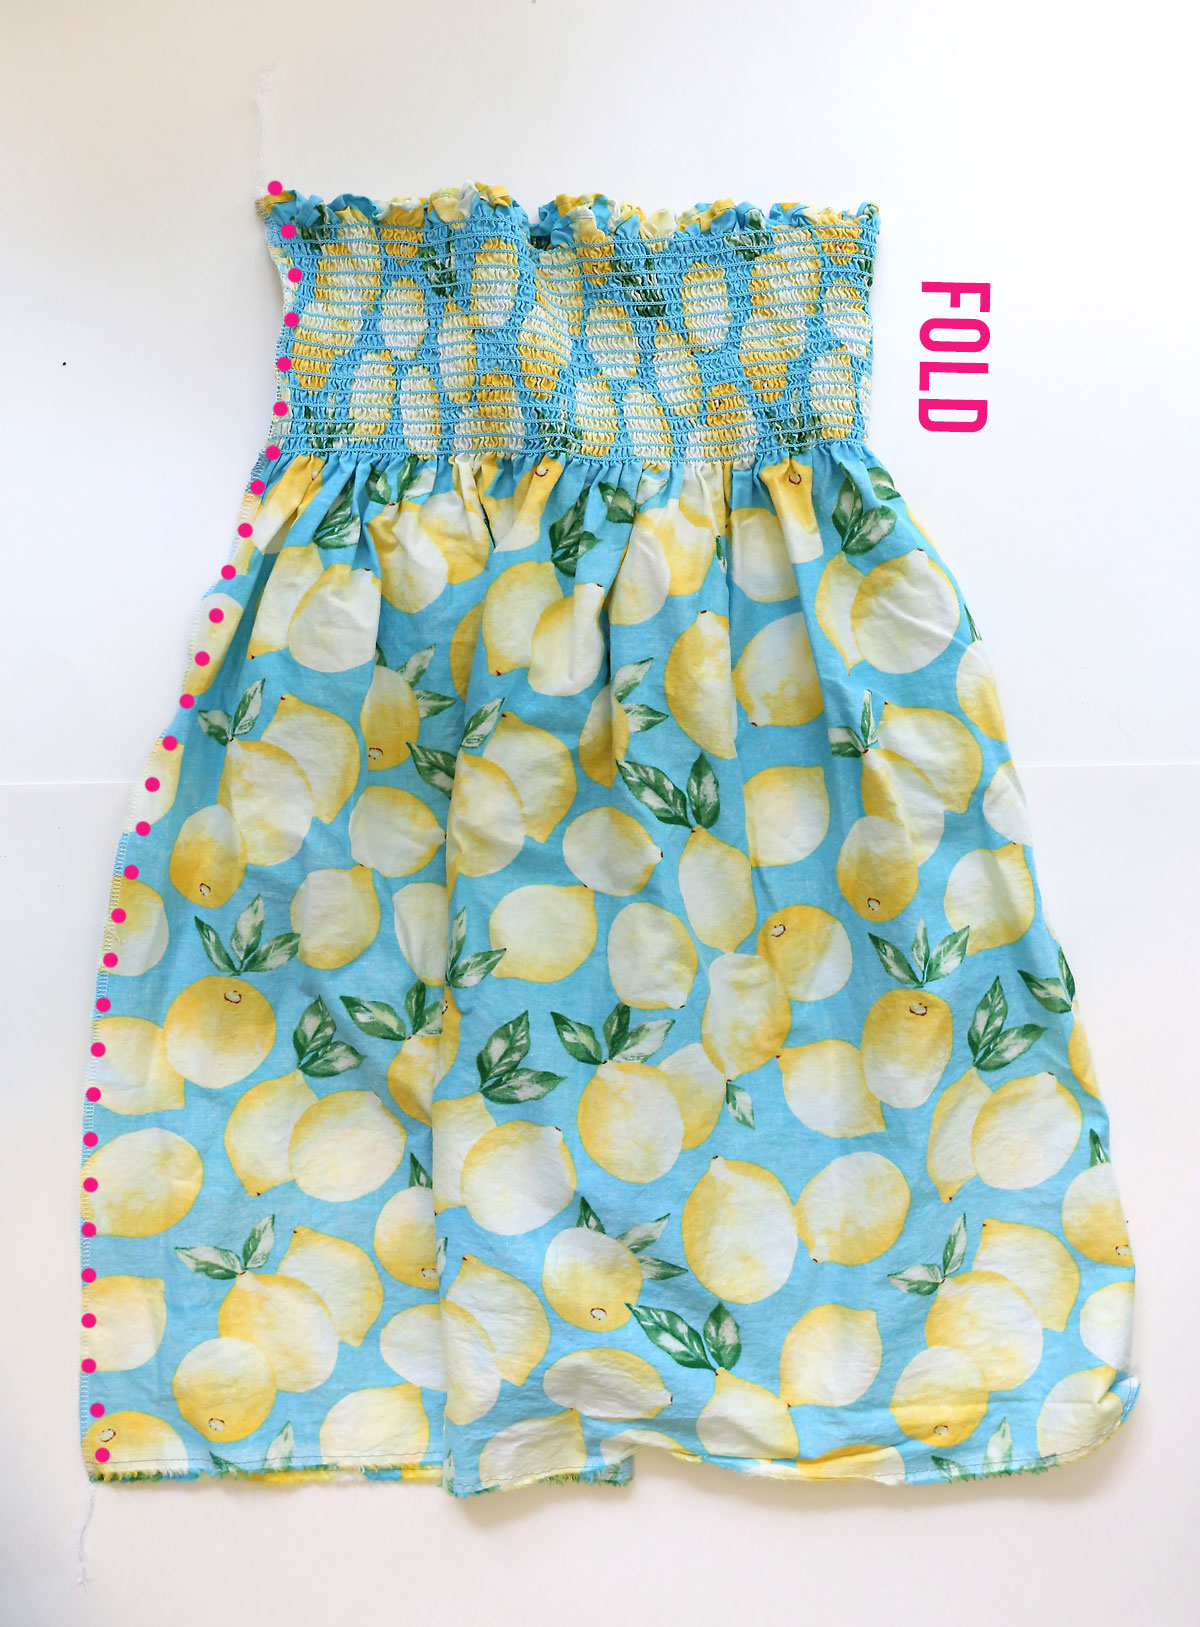 How to make a smocked sundress: sew the back seam